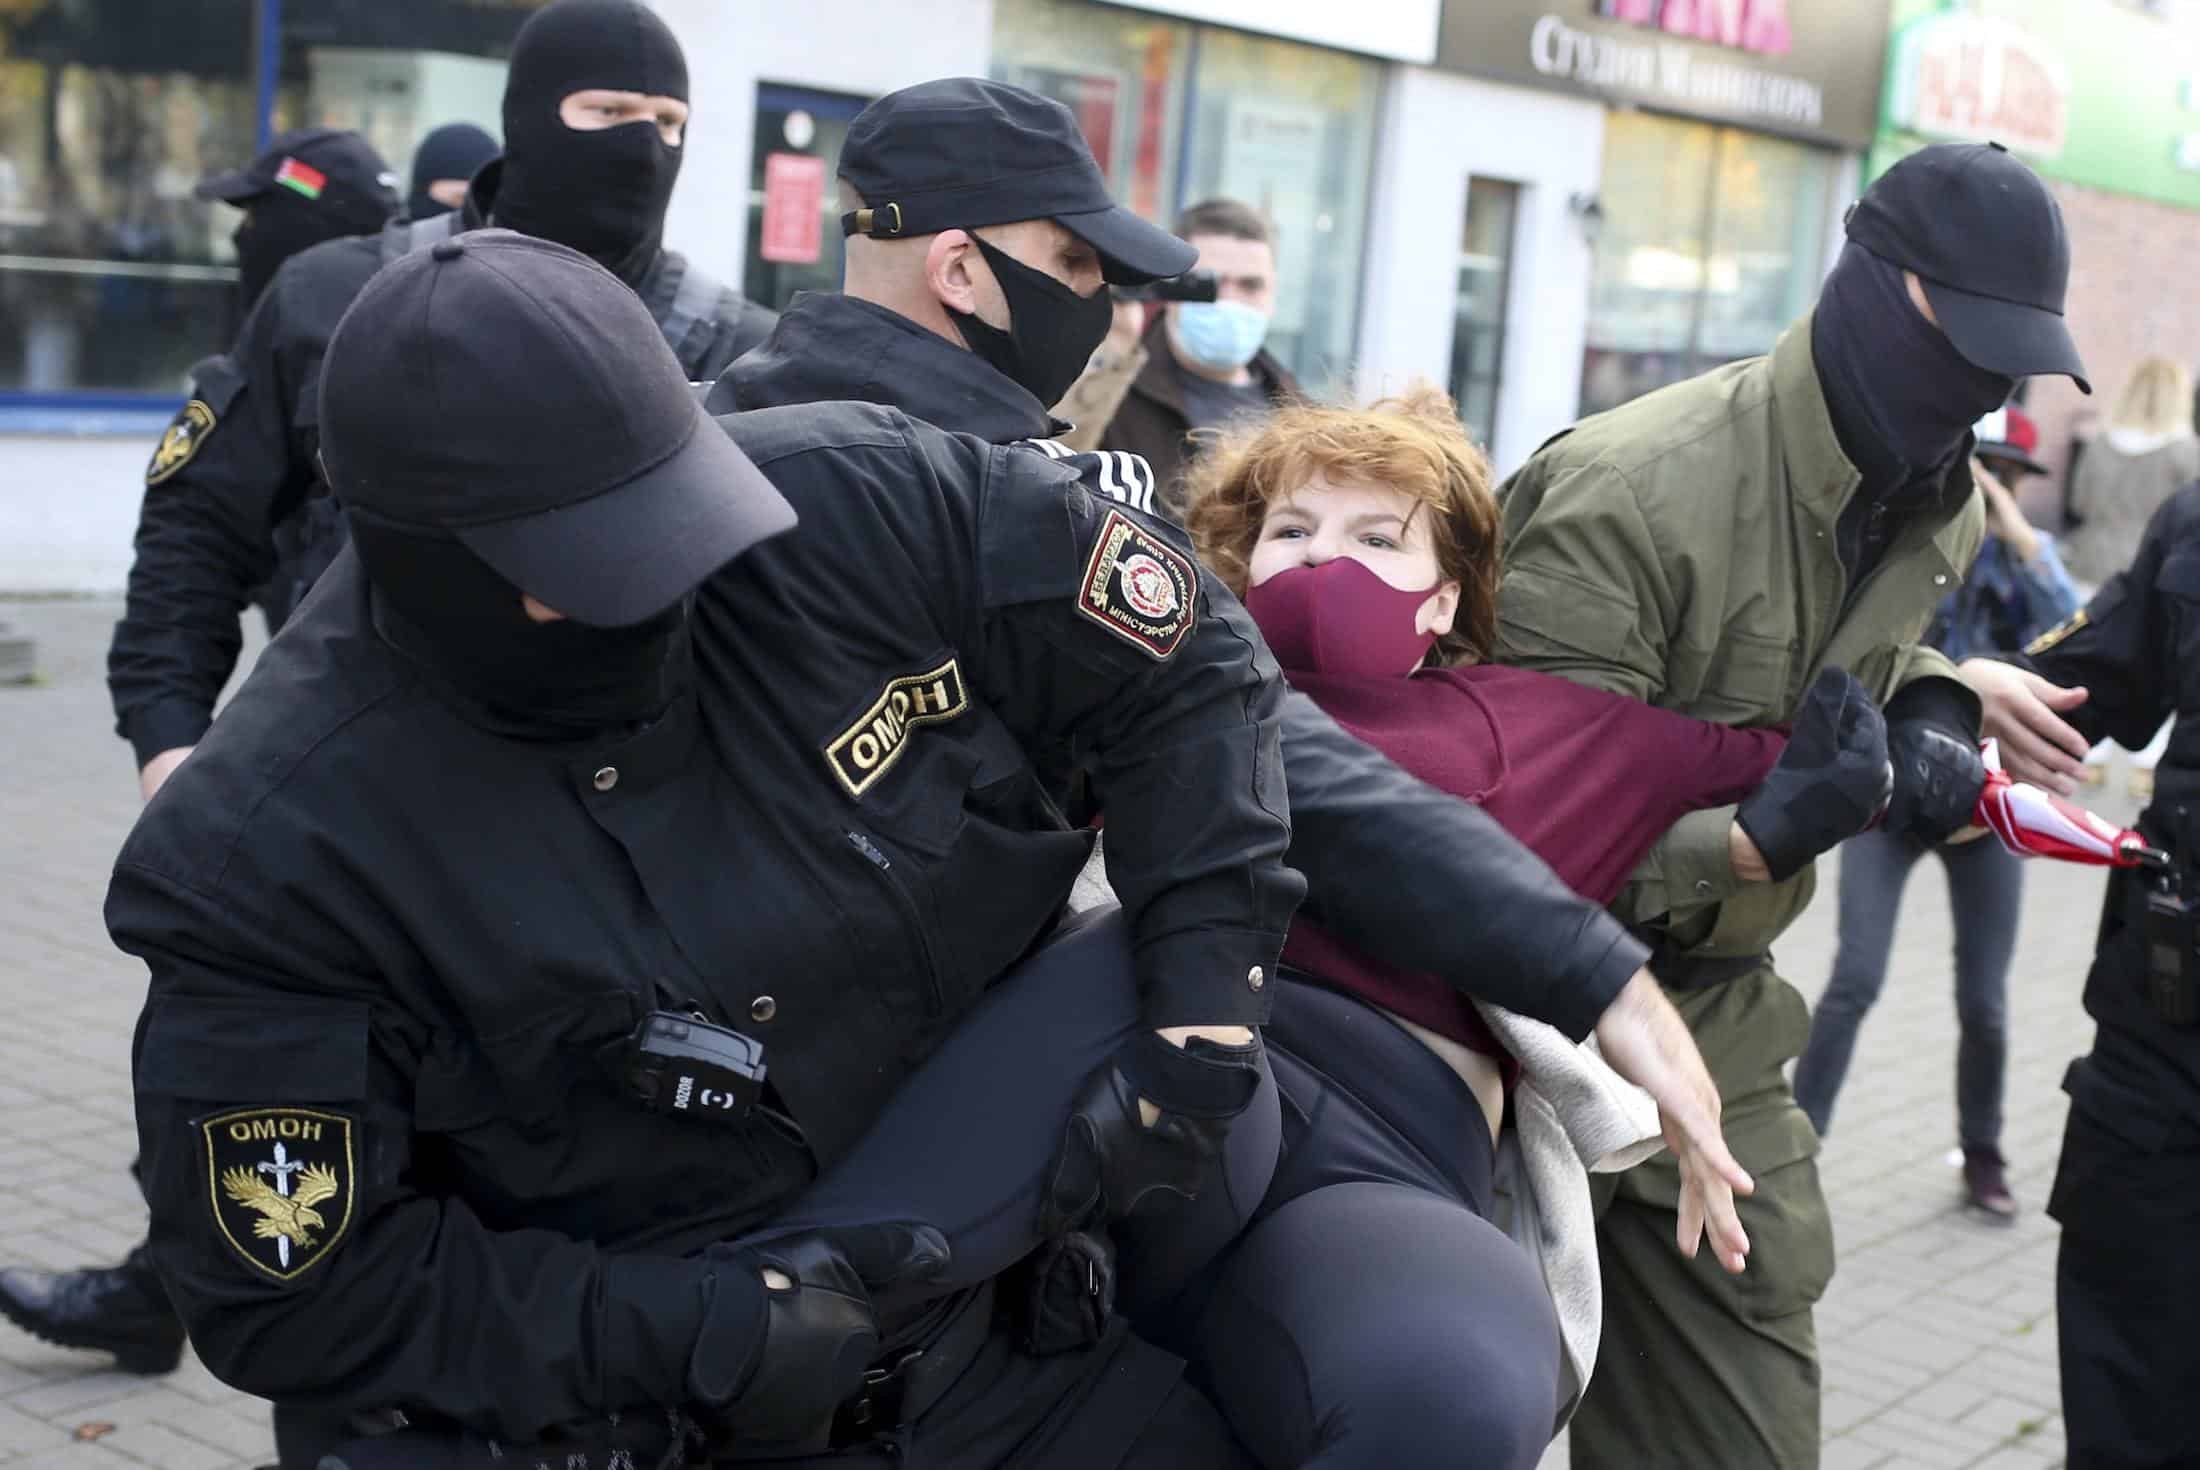 Video – 200 women arrested by Belarusian police at opposition protest